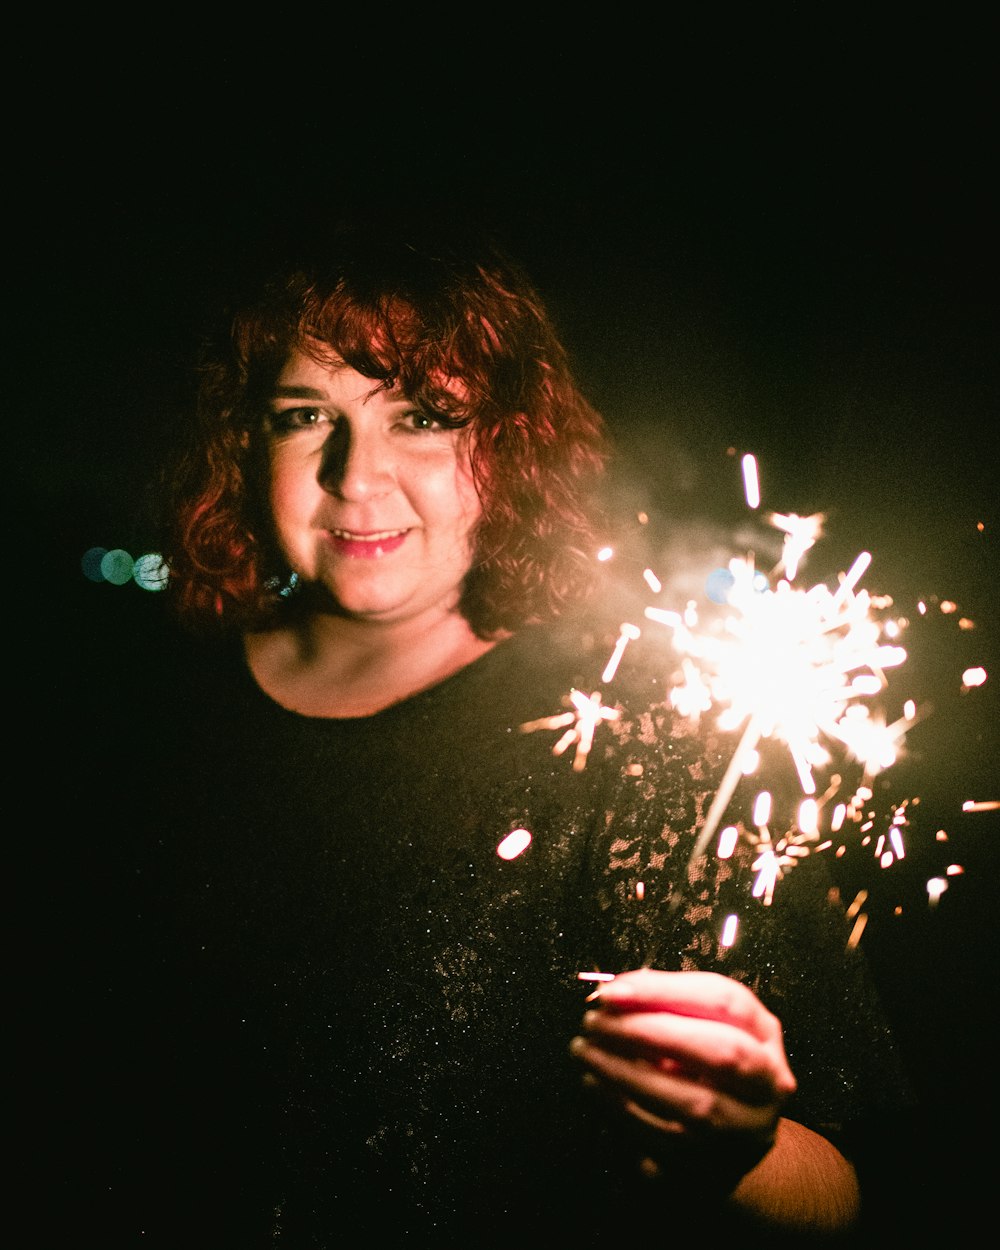 selective focus photography of smiling woman holding lit sparkler